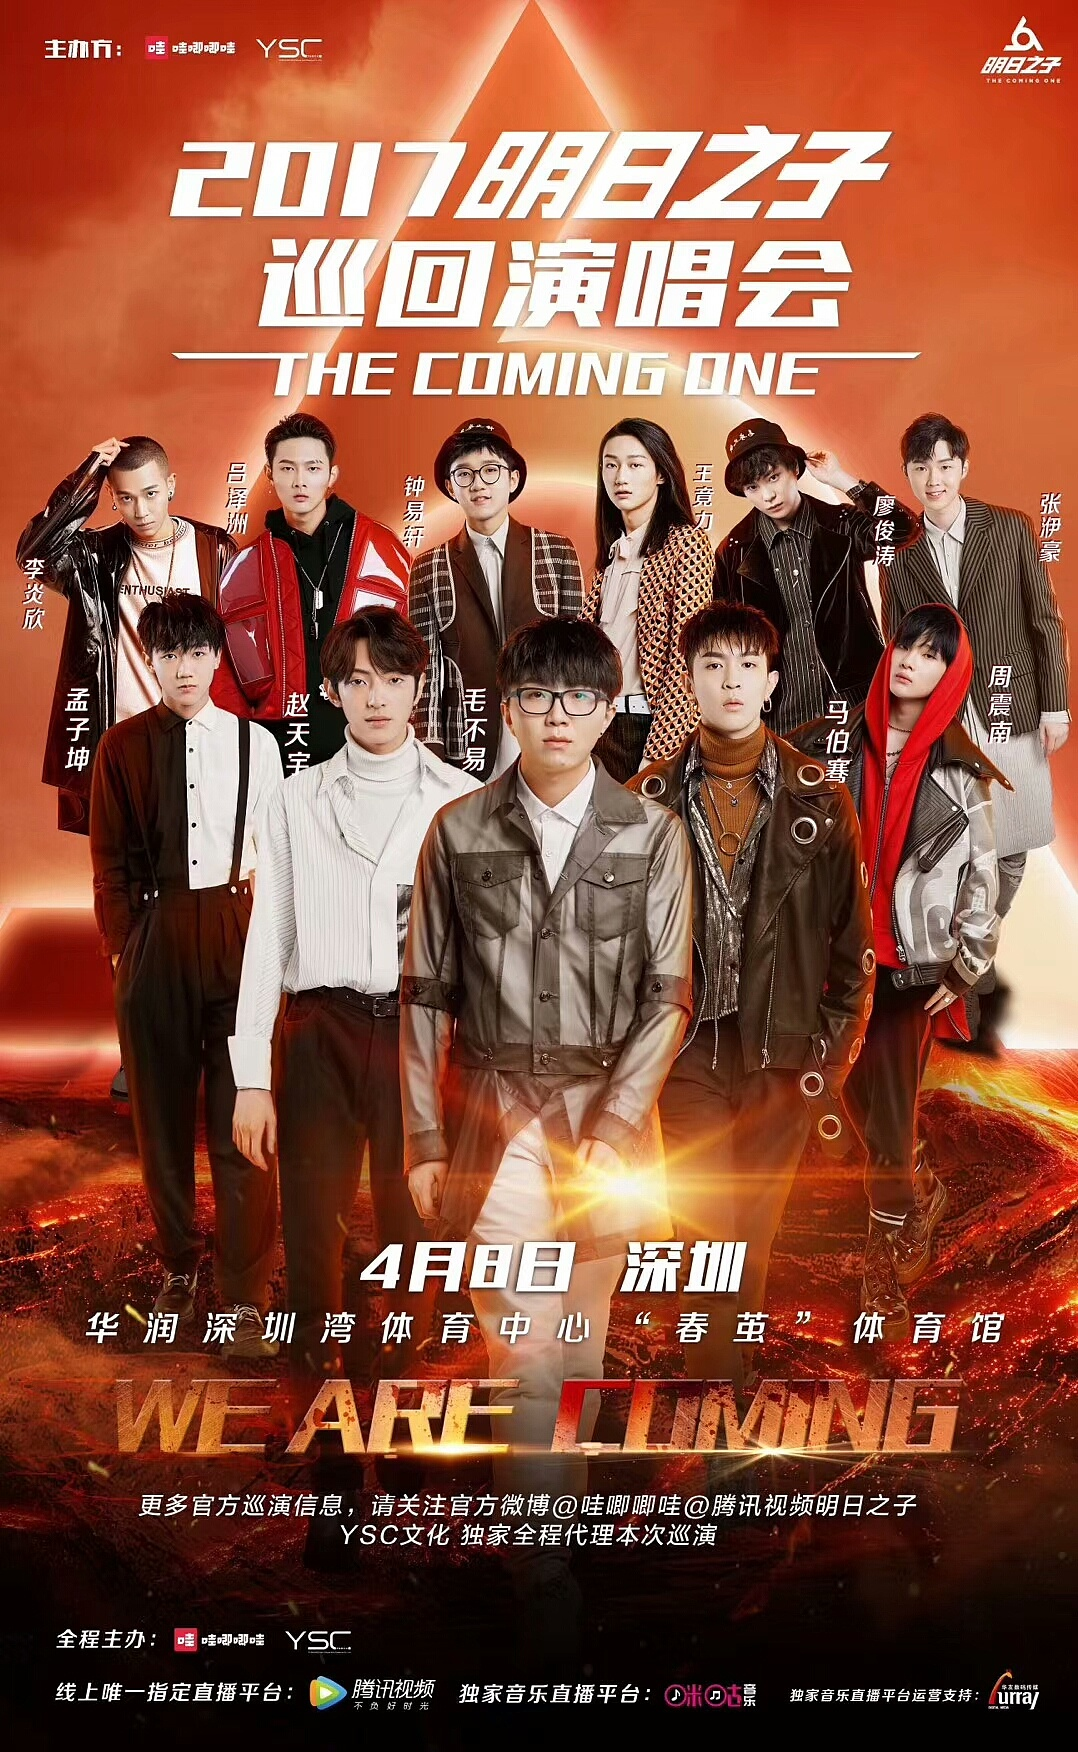 The Coming One | Chinese Music Wiki | Fandom